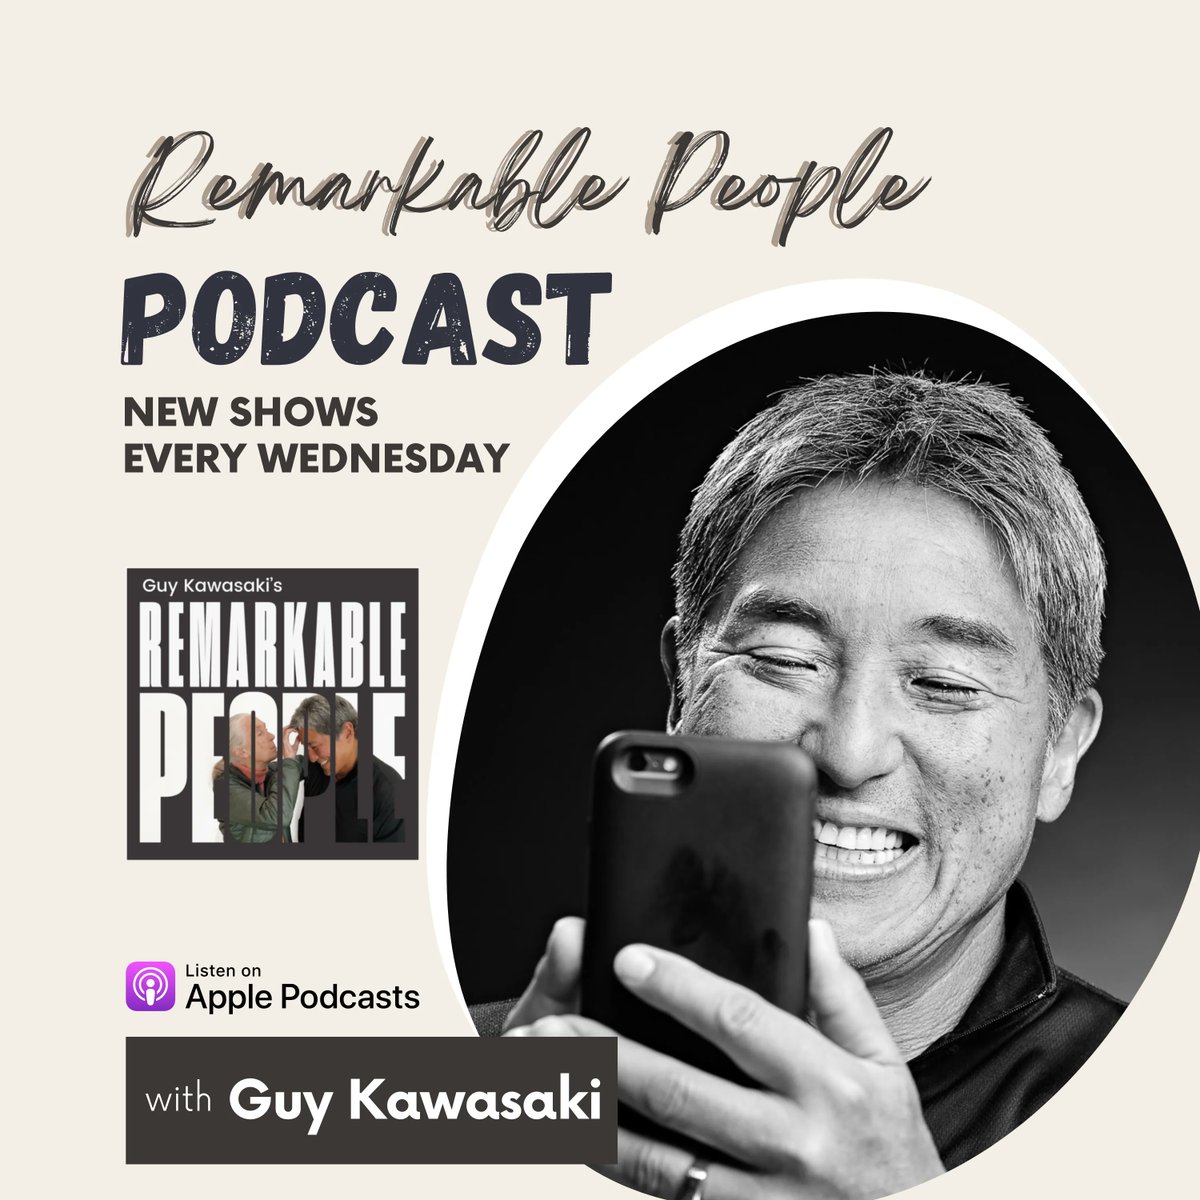 🎉 Celebrate my birthday with an inspiring episode on the Remarkable People podcast! Click here to listen now: bit.ly/wef9uao 
#RemarkablePeoplePodcast #GuyKawasaki #CareerInsights